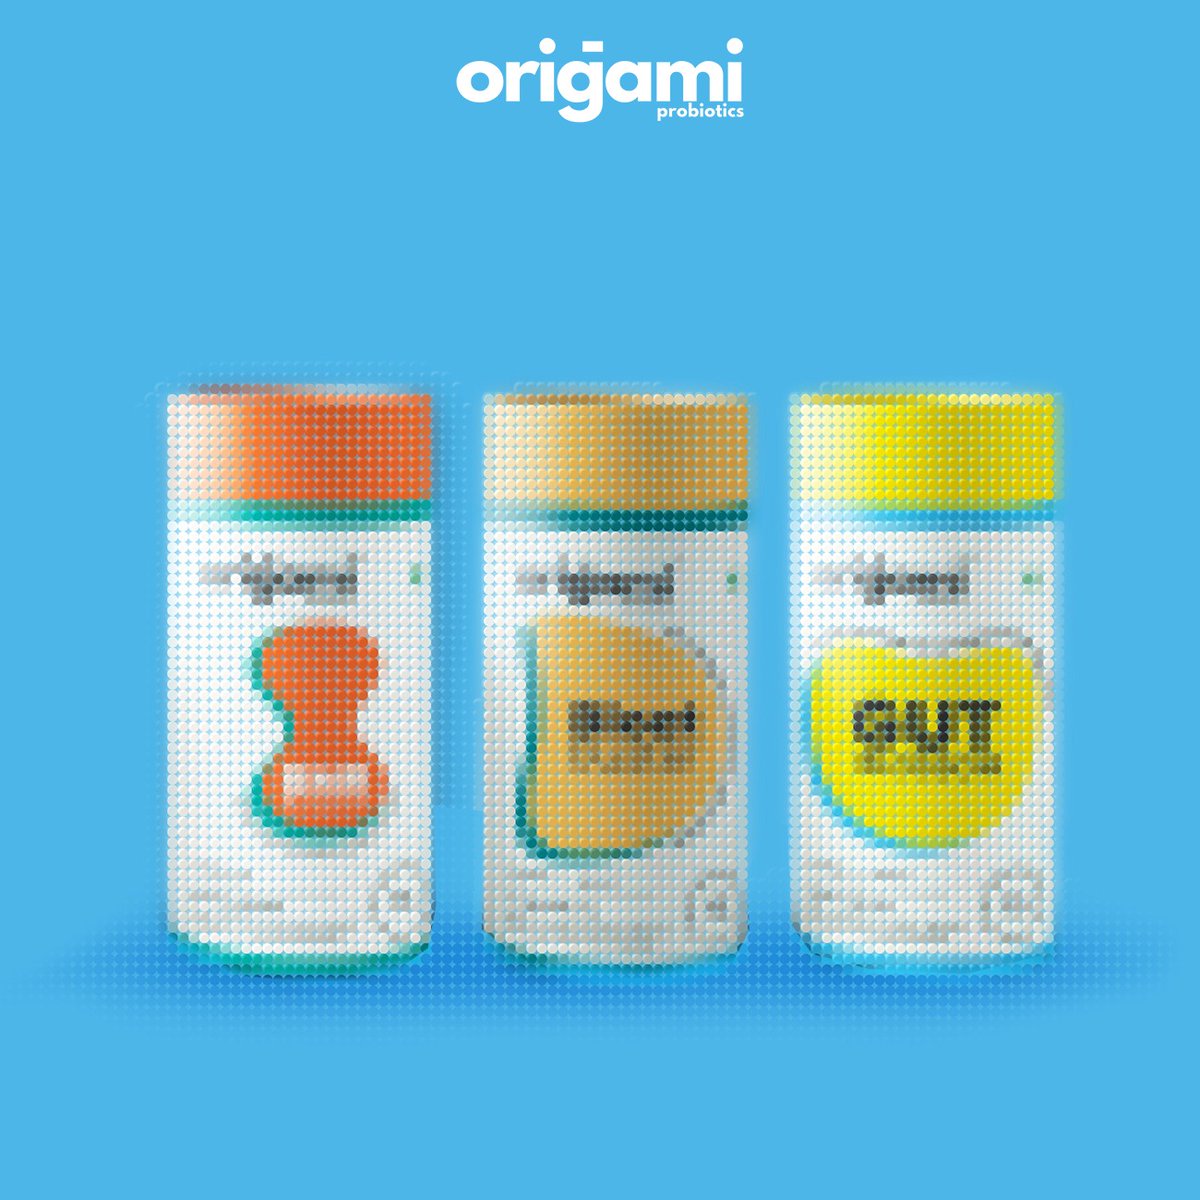 Clearing up the confusion, one fold at a time. ✨ Get ready for origami probiotics - your new solution to a healthier gut!

#Origami #Probiotic #Health #Prebuzz #Guthealth #Gutmicrobiome